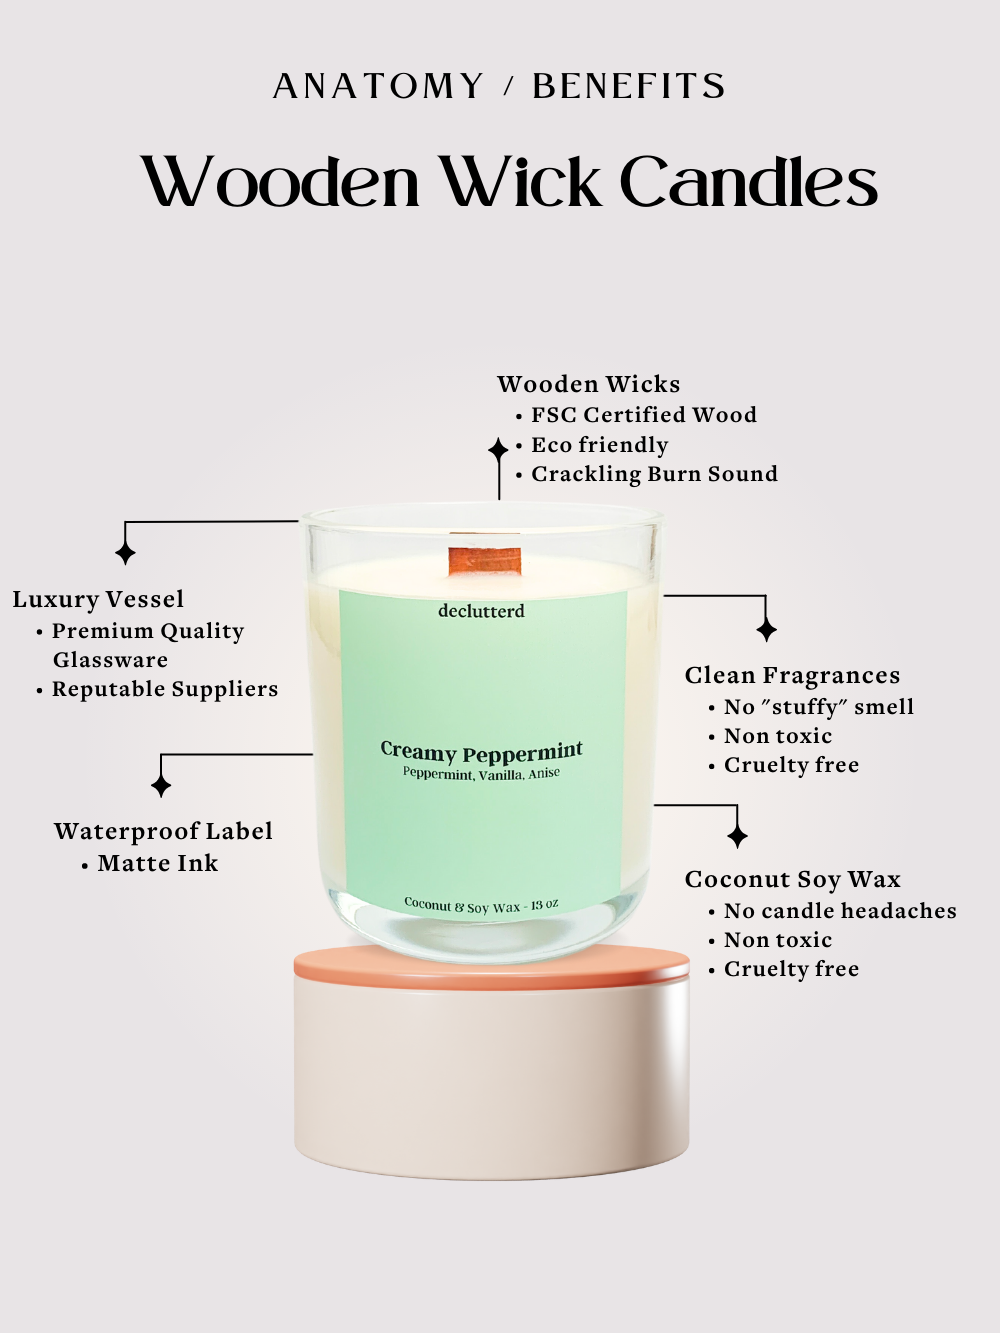 Creamy Peppermint Wood Wick Candle 8 oz.